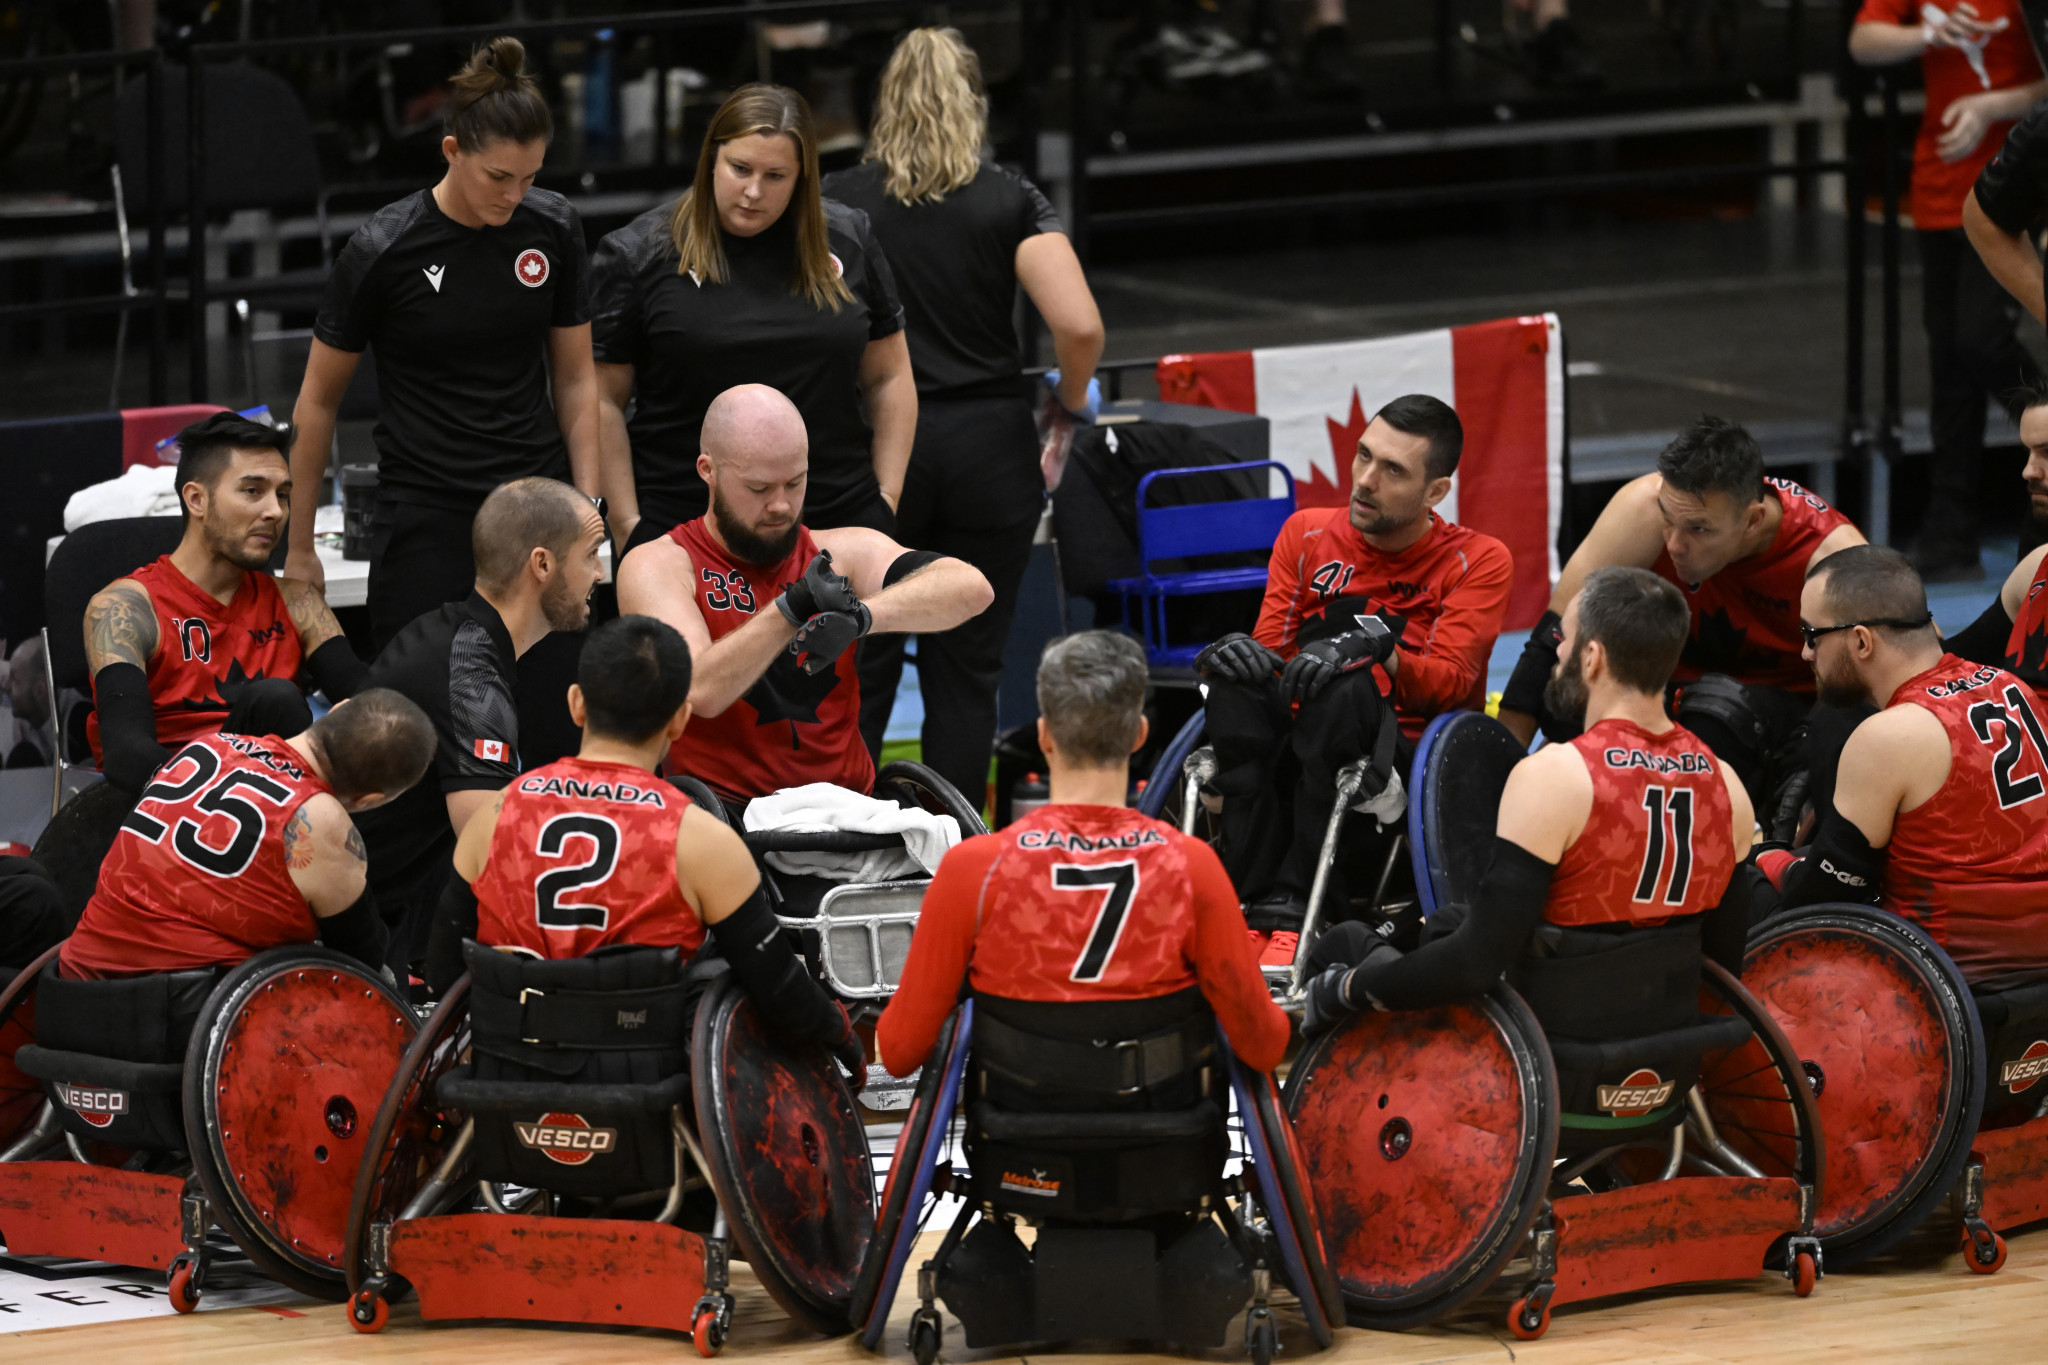 Canada huddled to work out how to prevent the US from scoring, though with little luck ©Lars Møller/Parasport Denmark